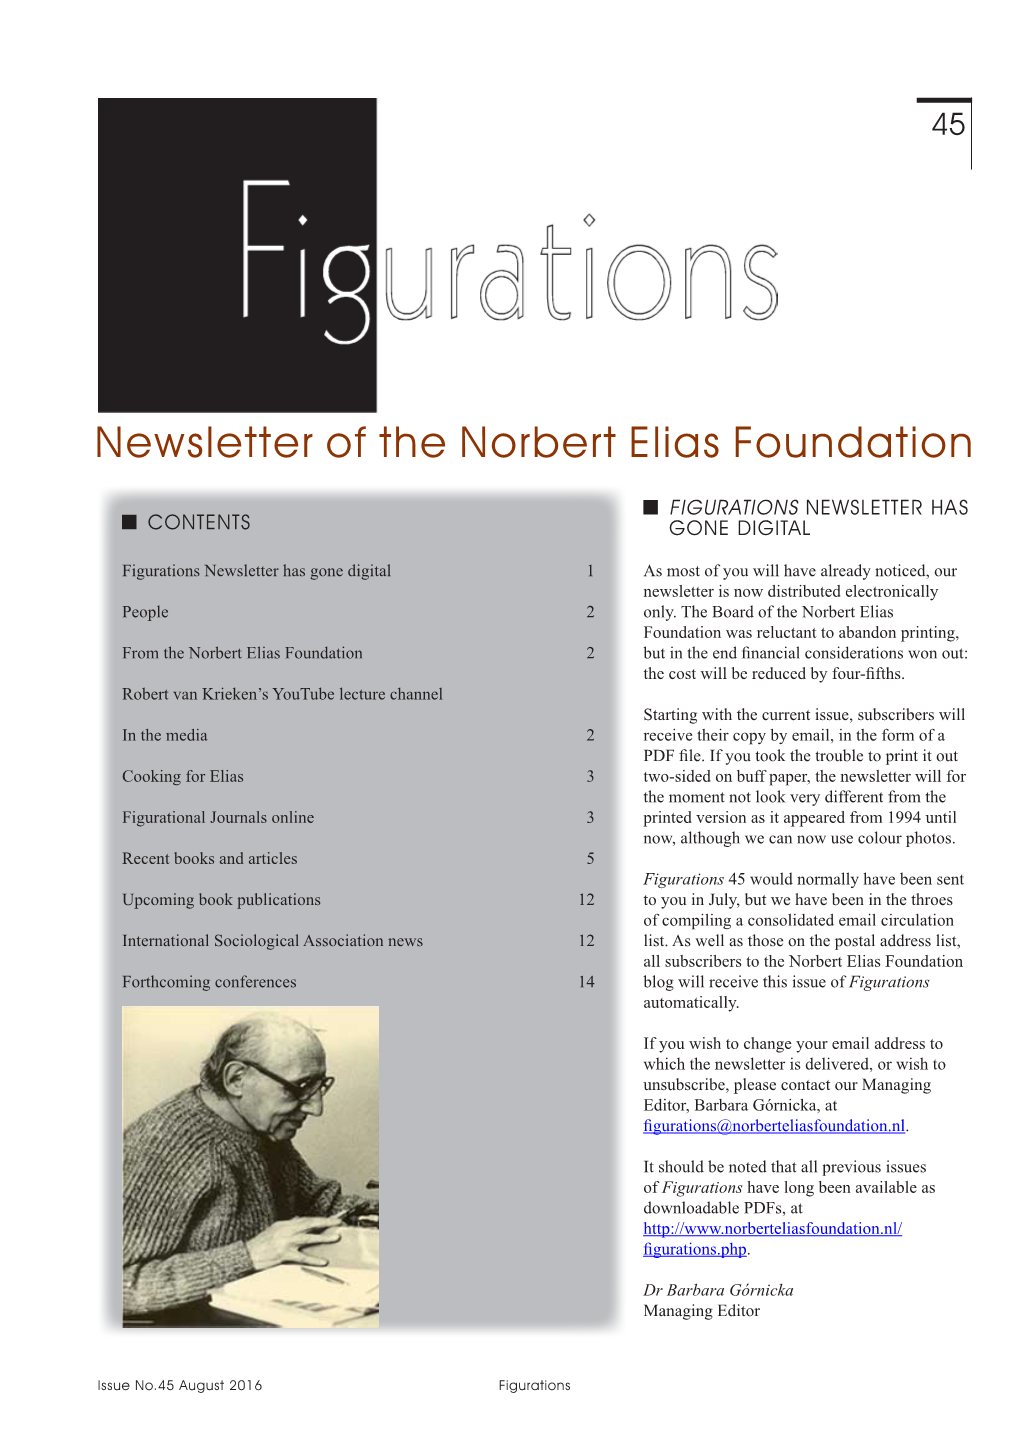 Newsletter of the Norbert Elias Foundation